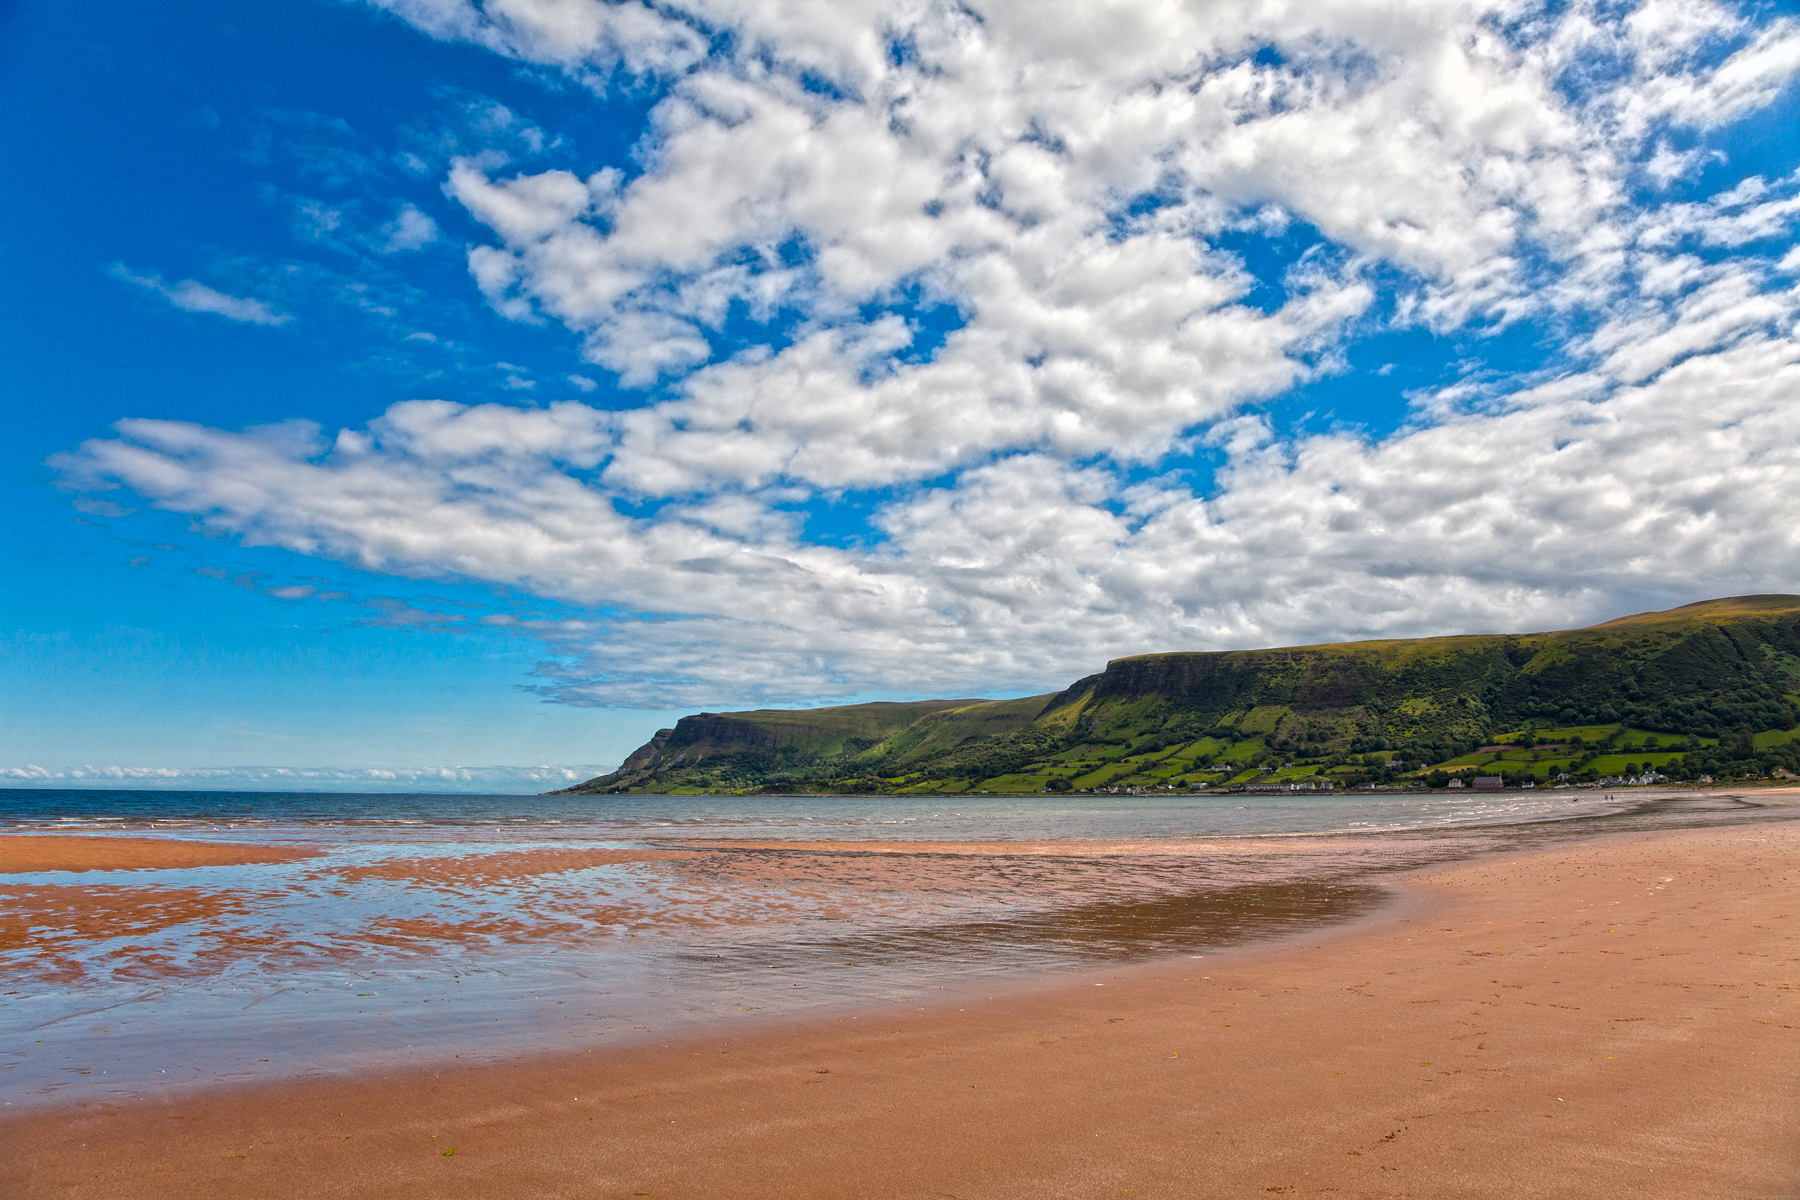 Waterfoot beach - hdr photo